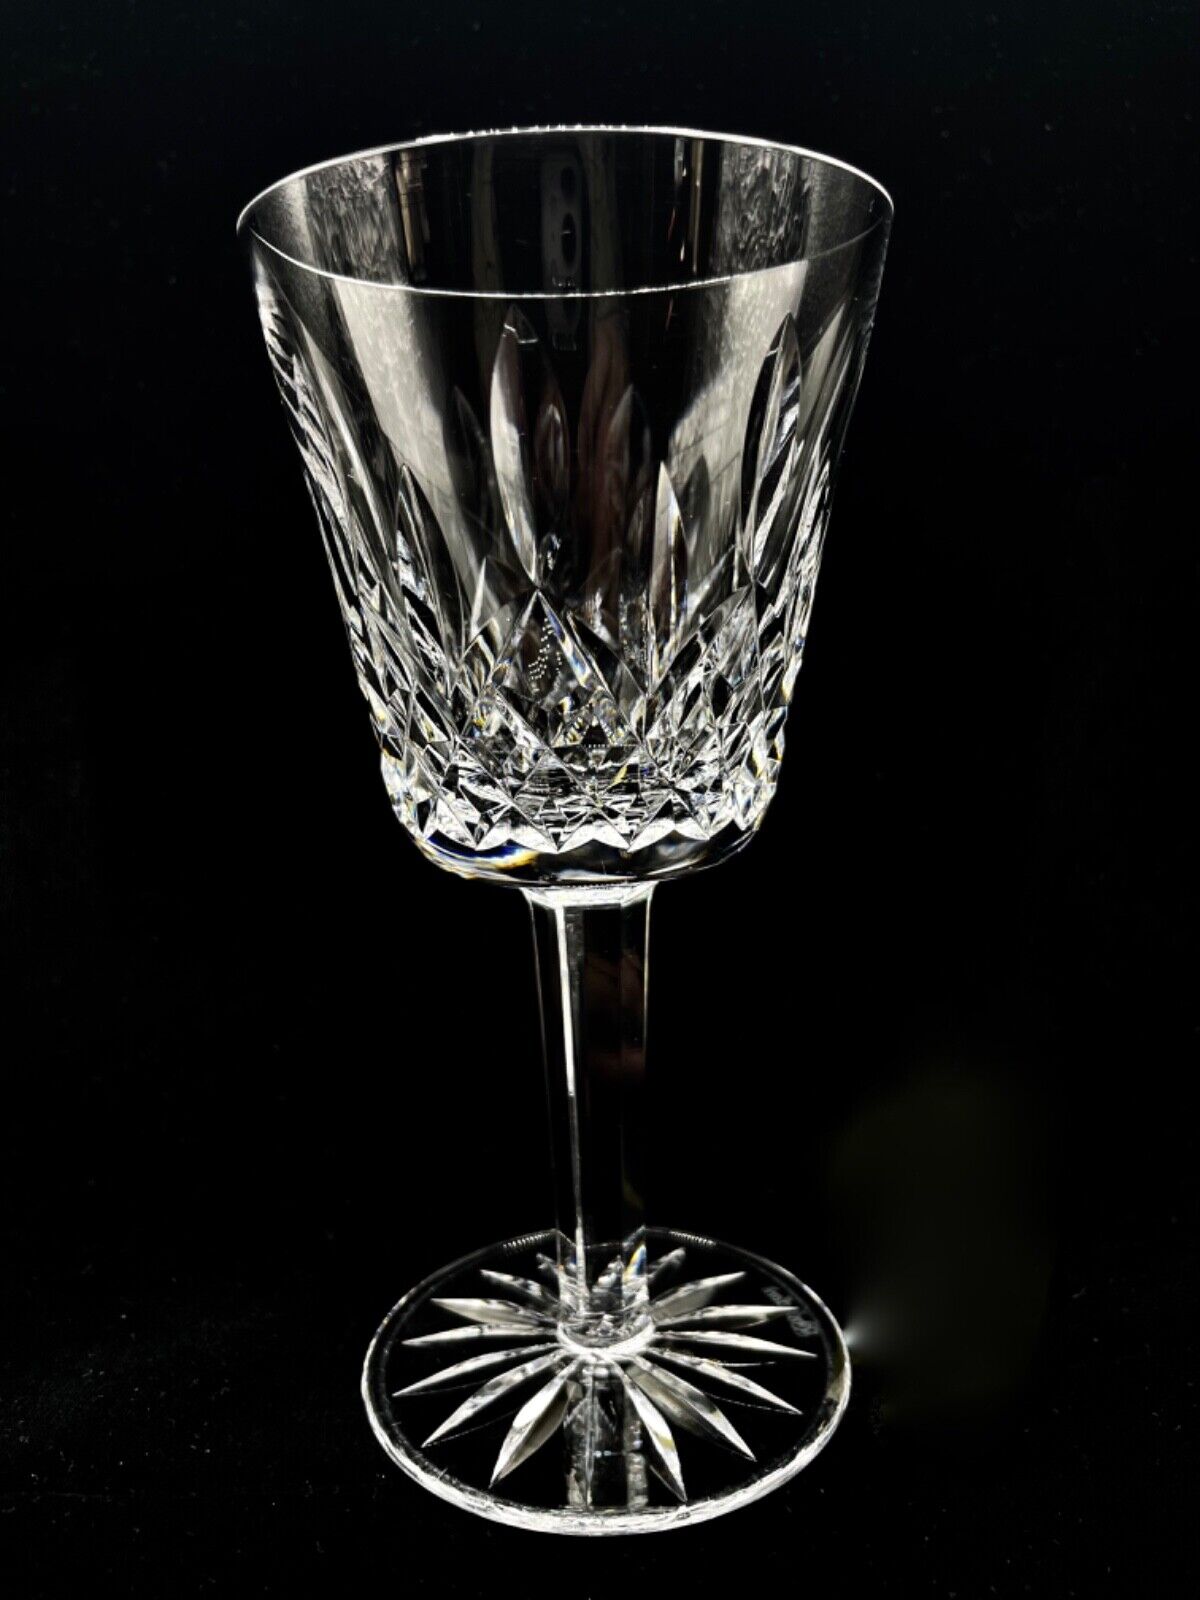 WATERFORD LISMORE WINE GLASS 5 7/8 TALL X 2 7/8 DIA.